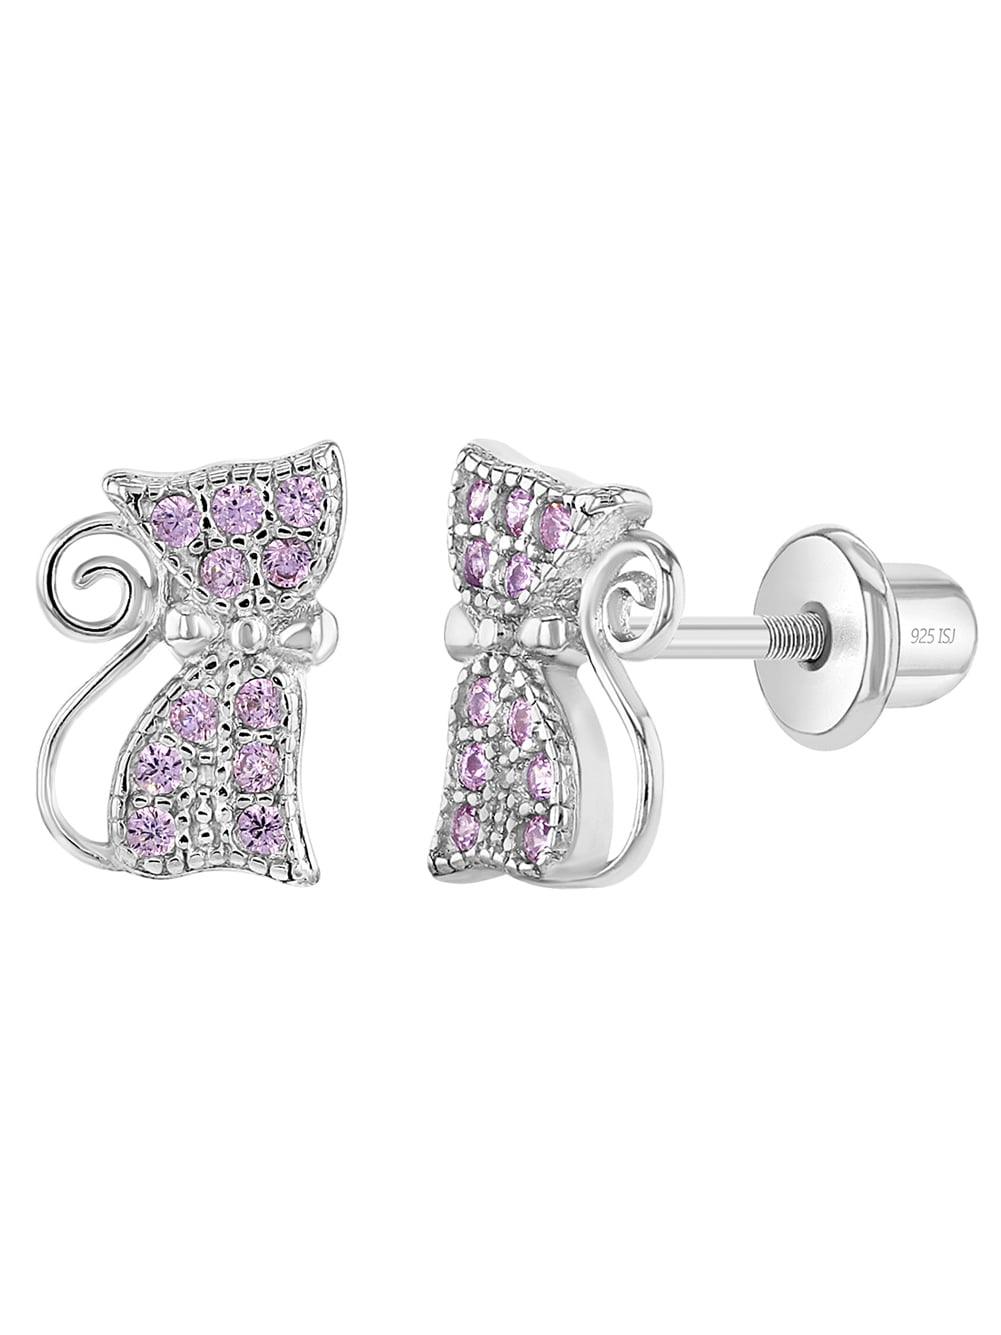 Details about   925 Sterling Silver Pink CZ Screw Back Cat Earrings for Girls & Teens Kitty 